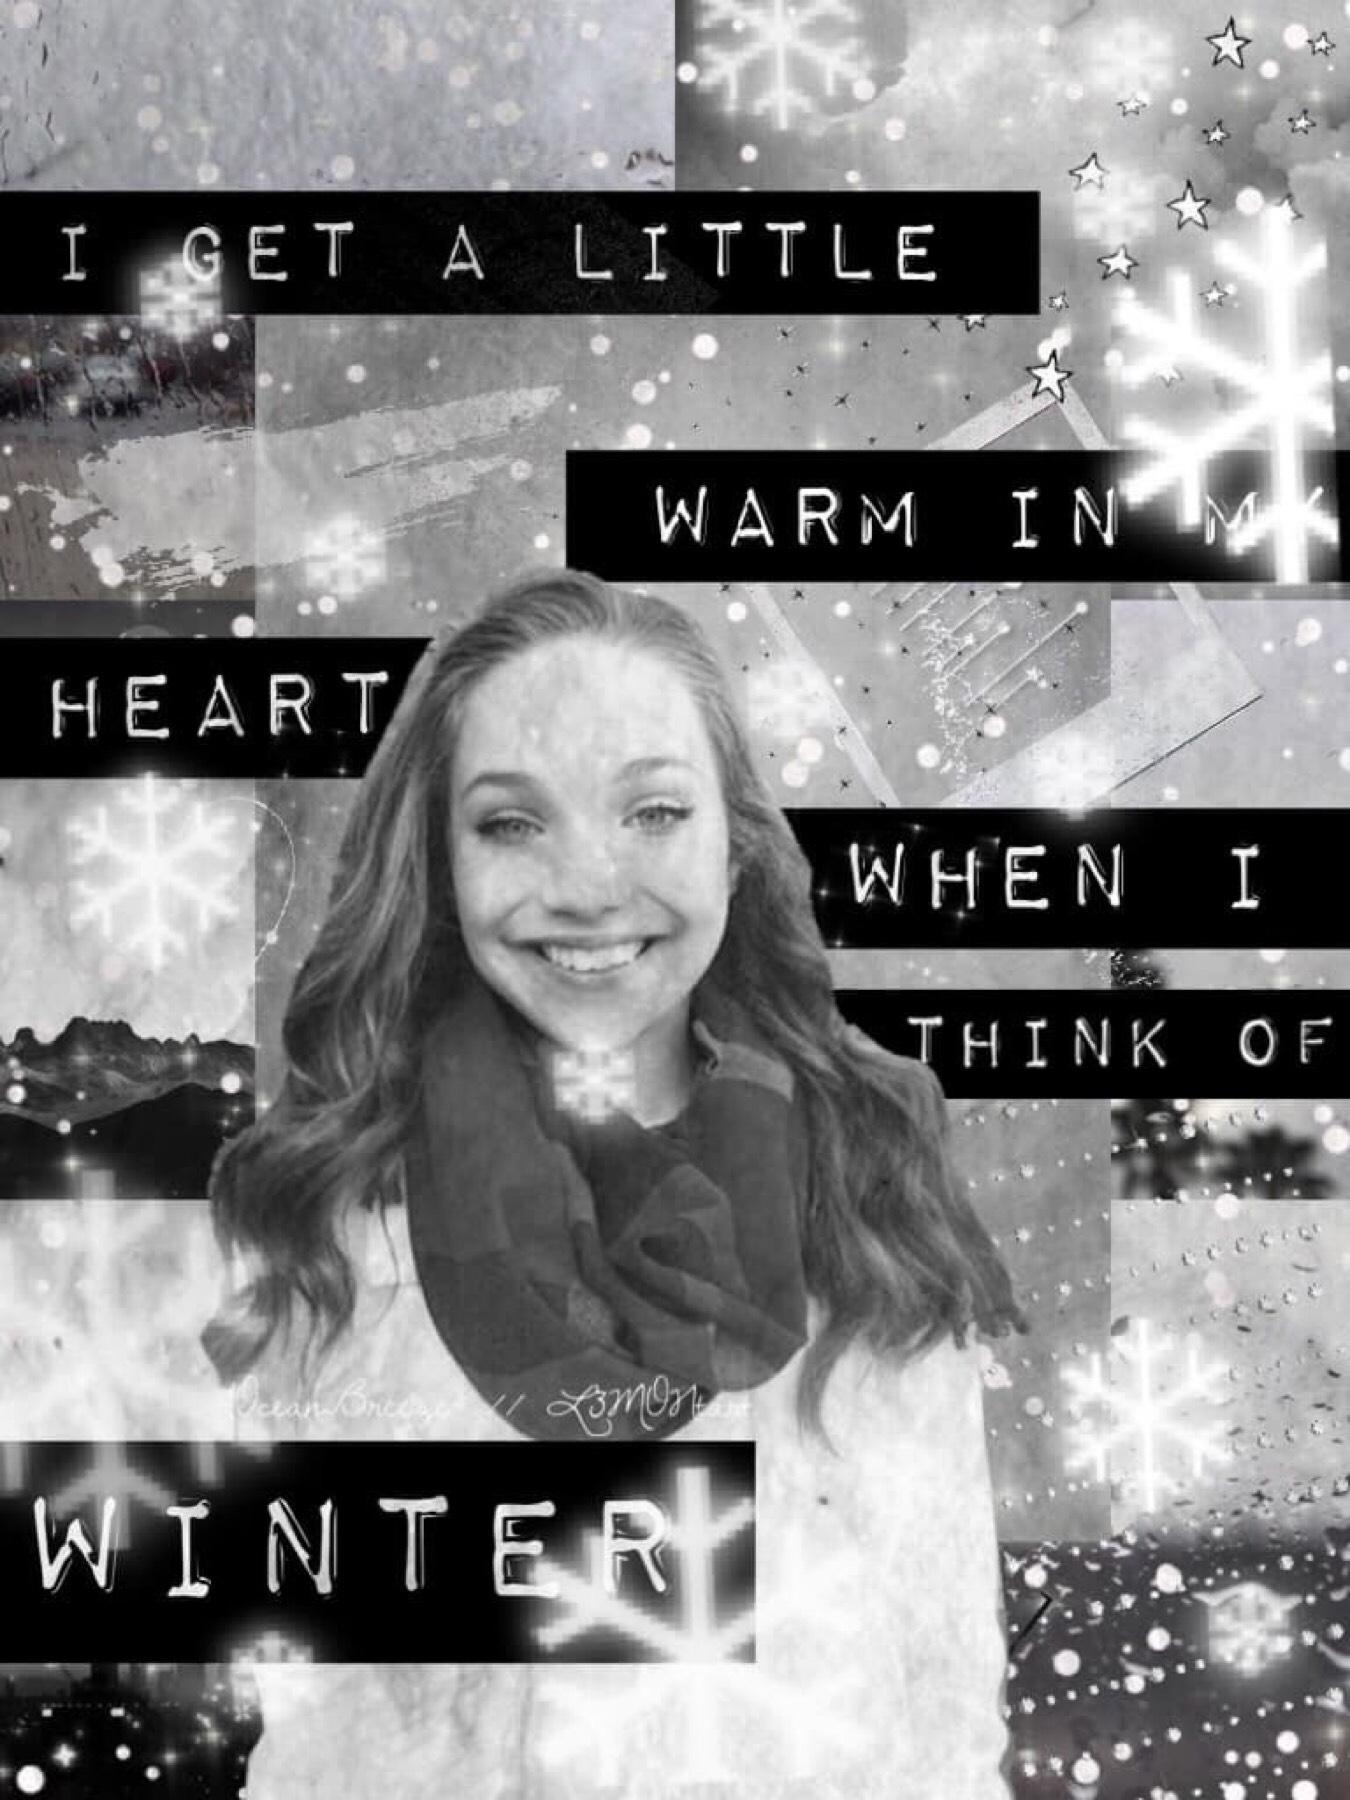 Tap

Collab with L3MONtart... did this on my main too. I’m posting this as it’s winter and the quote is fitting for the time of year haha xx